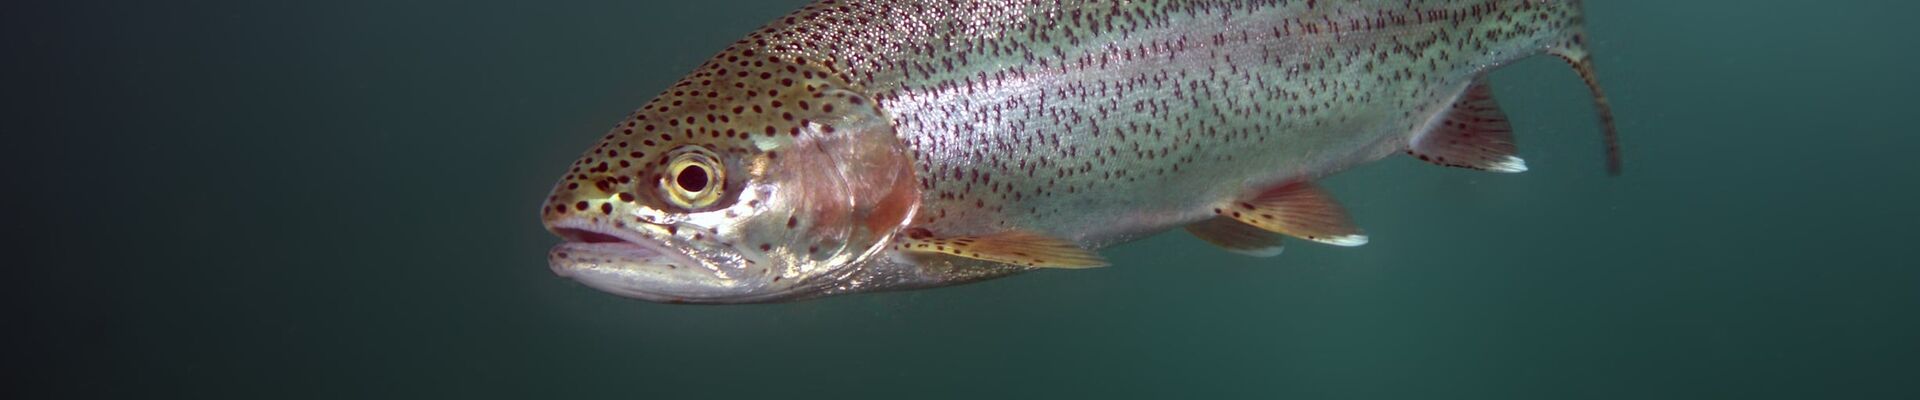 Trout Digestion in Cold Water